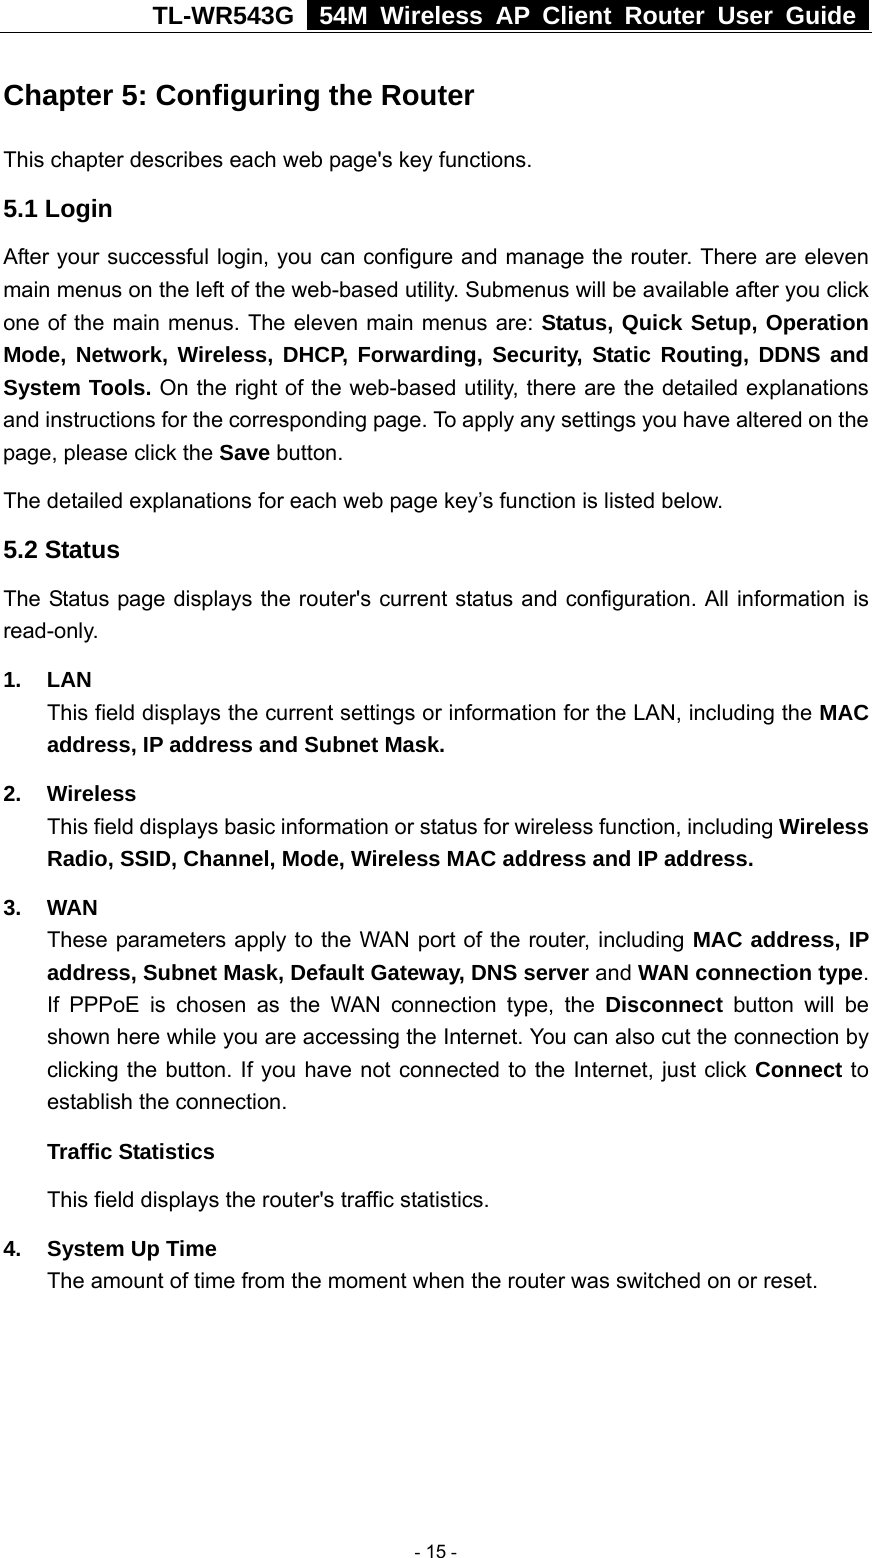 TL-WR543G   54M Wireless AP Client Router User Guide  Chapter 5: Configuring the Router This chapter describes each web page&apos;s key functions. 5.1 Login   After your successful login, you can configure and manage the router. There are eleven main menus on the left of the web-based utility. Submenus will be available after you click one of the main menus. The eleven main menus are: Status, Quick Setup, Operation Mode, Network, Wireless, DHCP, Forwarding, Security, Static Routing, DDNS and System Tools. On the right of the web-based utility, there are the detailed explanations and instructions for the corresponding page. To apply any settings you have altered on the page, please click the Save button.   The detailed explanations for each web page key’s function is listed below.   5.2 Status The Status page displays the router&apos;s current status and configuration. All information is read-only. 1. LAN This field displays the current settings or information for the LAN, including the MAC address, IP address and Subnet Mask. 2. Wireless This field displays basic information or status for wireless function, including Wireless Radio, SSID, Channel, Mode, Wireless MAC address and IP address. 3. WAN These parameters apply to the WAN port of the router, including MAC address, IP address, Subnet Mask, Default Gateway, DNS server and WAN connection type. If PPPoE is chosen as the WAN connection type, the Disconnect button will be shown here while you are accessing the Internet. You can also cut the connection by clicking the button. If you have not connected to the Internet, just click Connect to establish the connection. Traffic Statistics This field displays the router&apos;s traffic statistics.   4.  System Up Time The amount of time from the moment when the router was switched on or reset.    - 15 - 